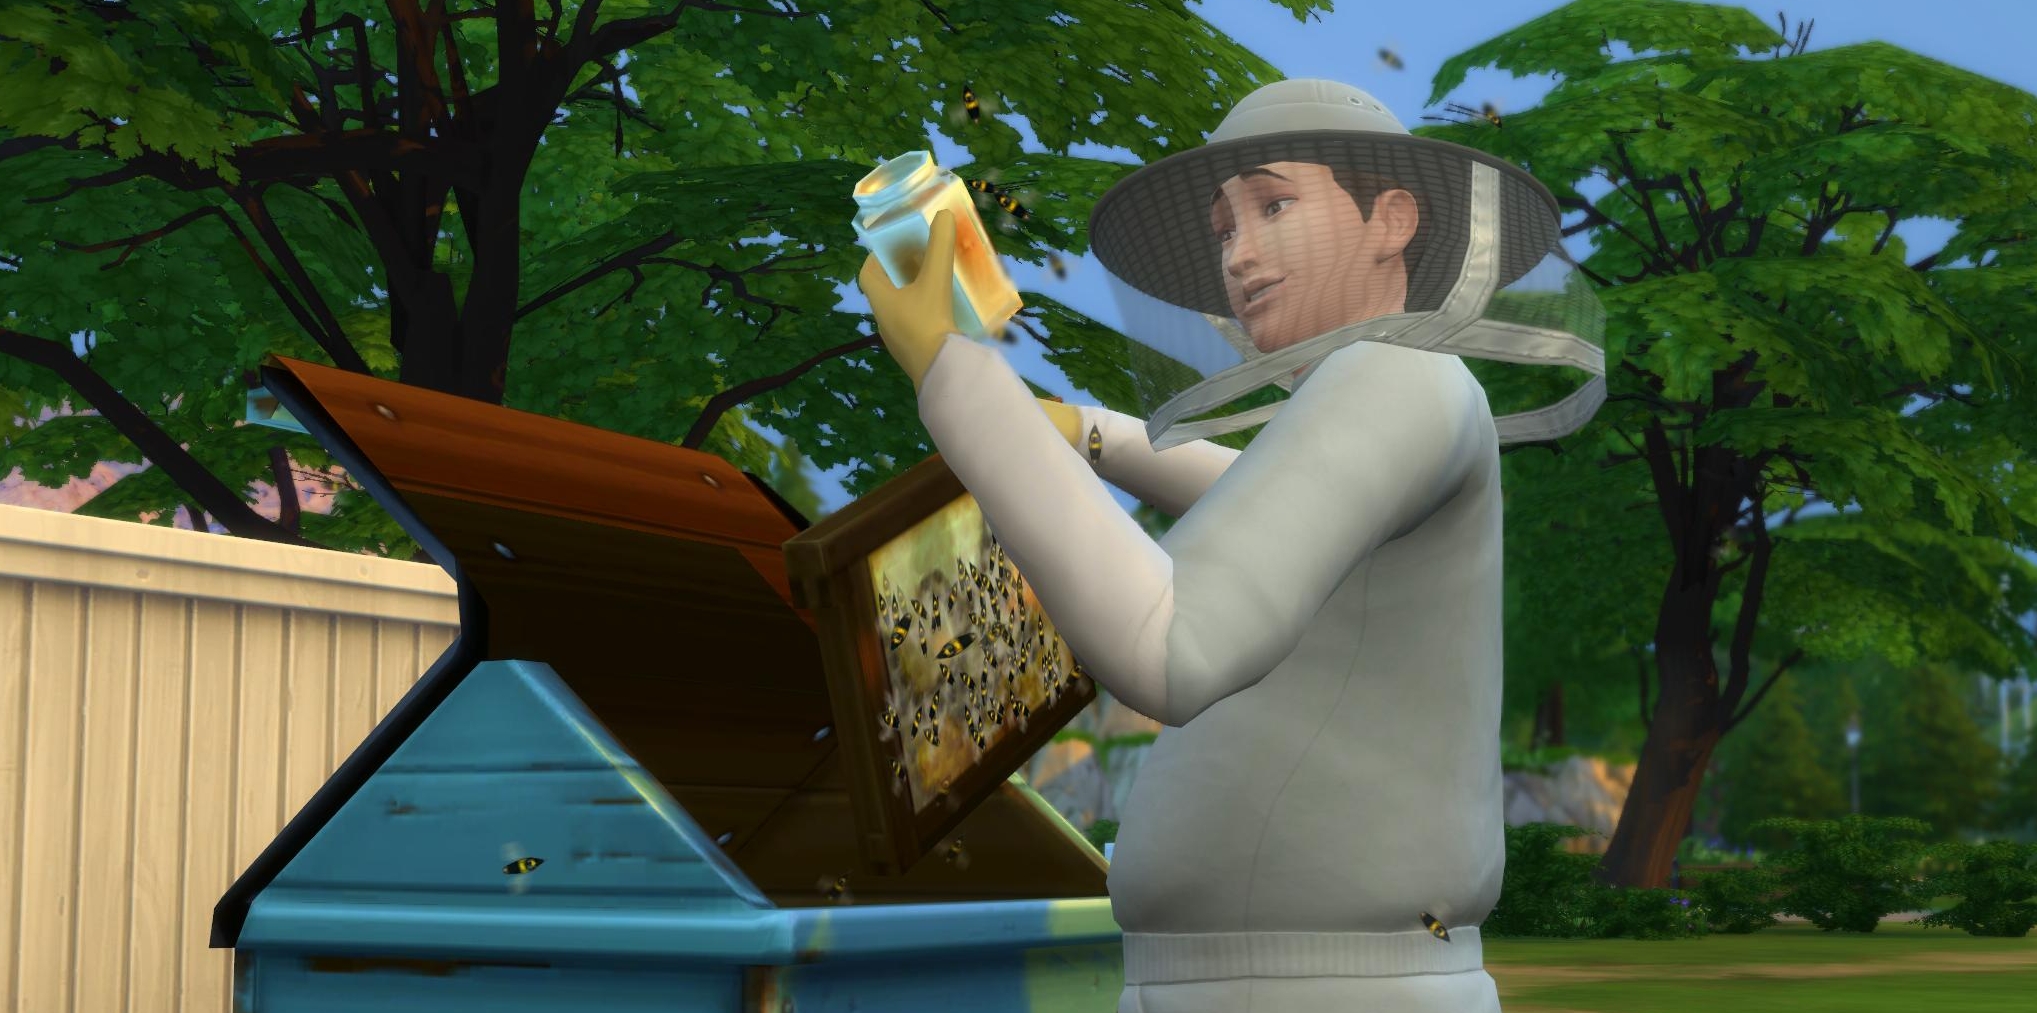 Beekeeping with the Bee Box in The Sims 4 Seasons